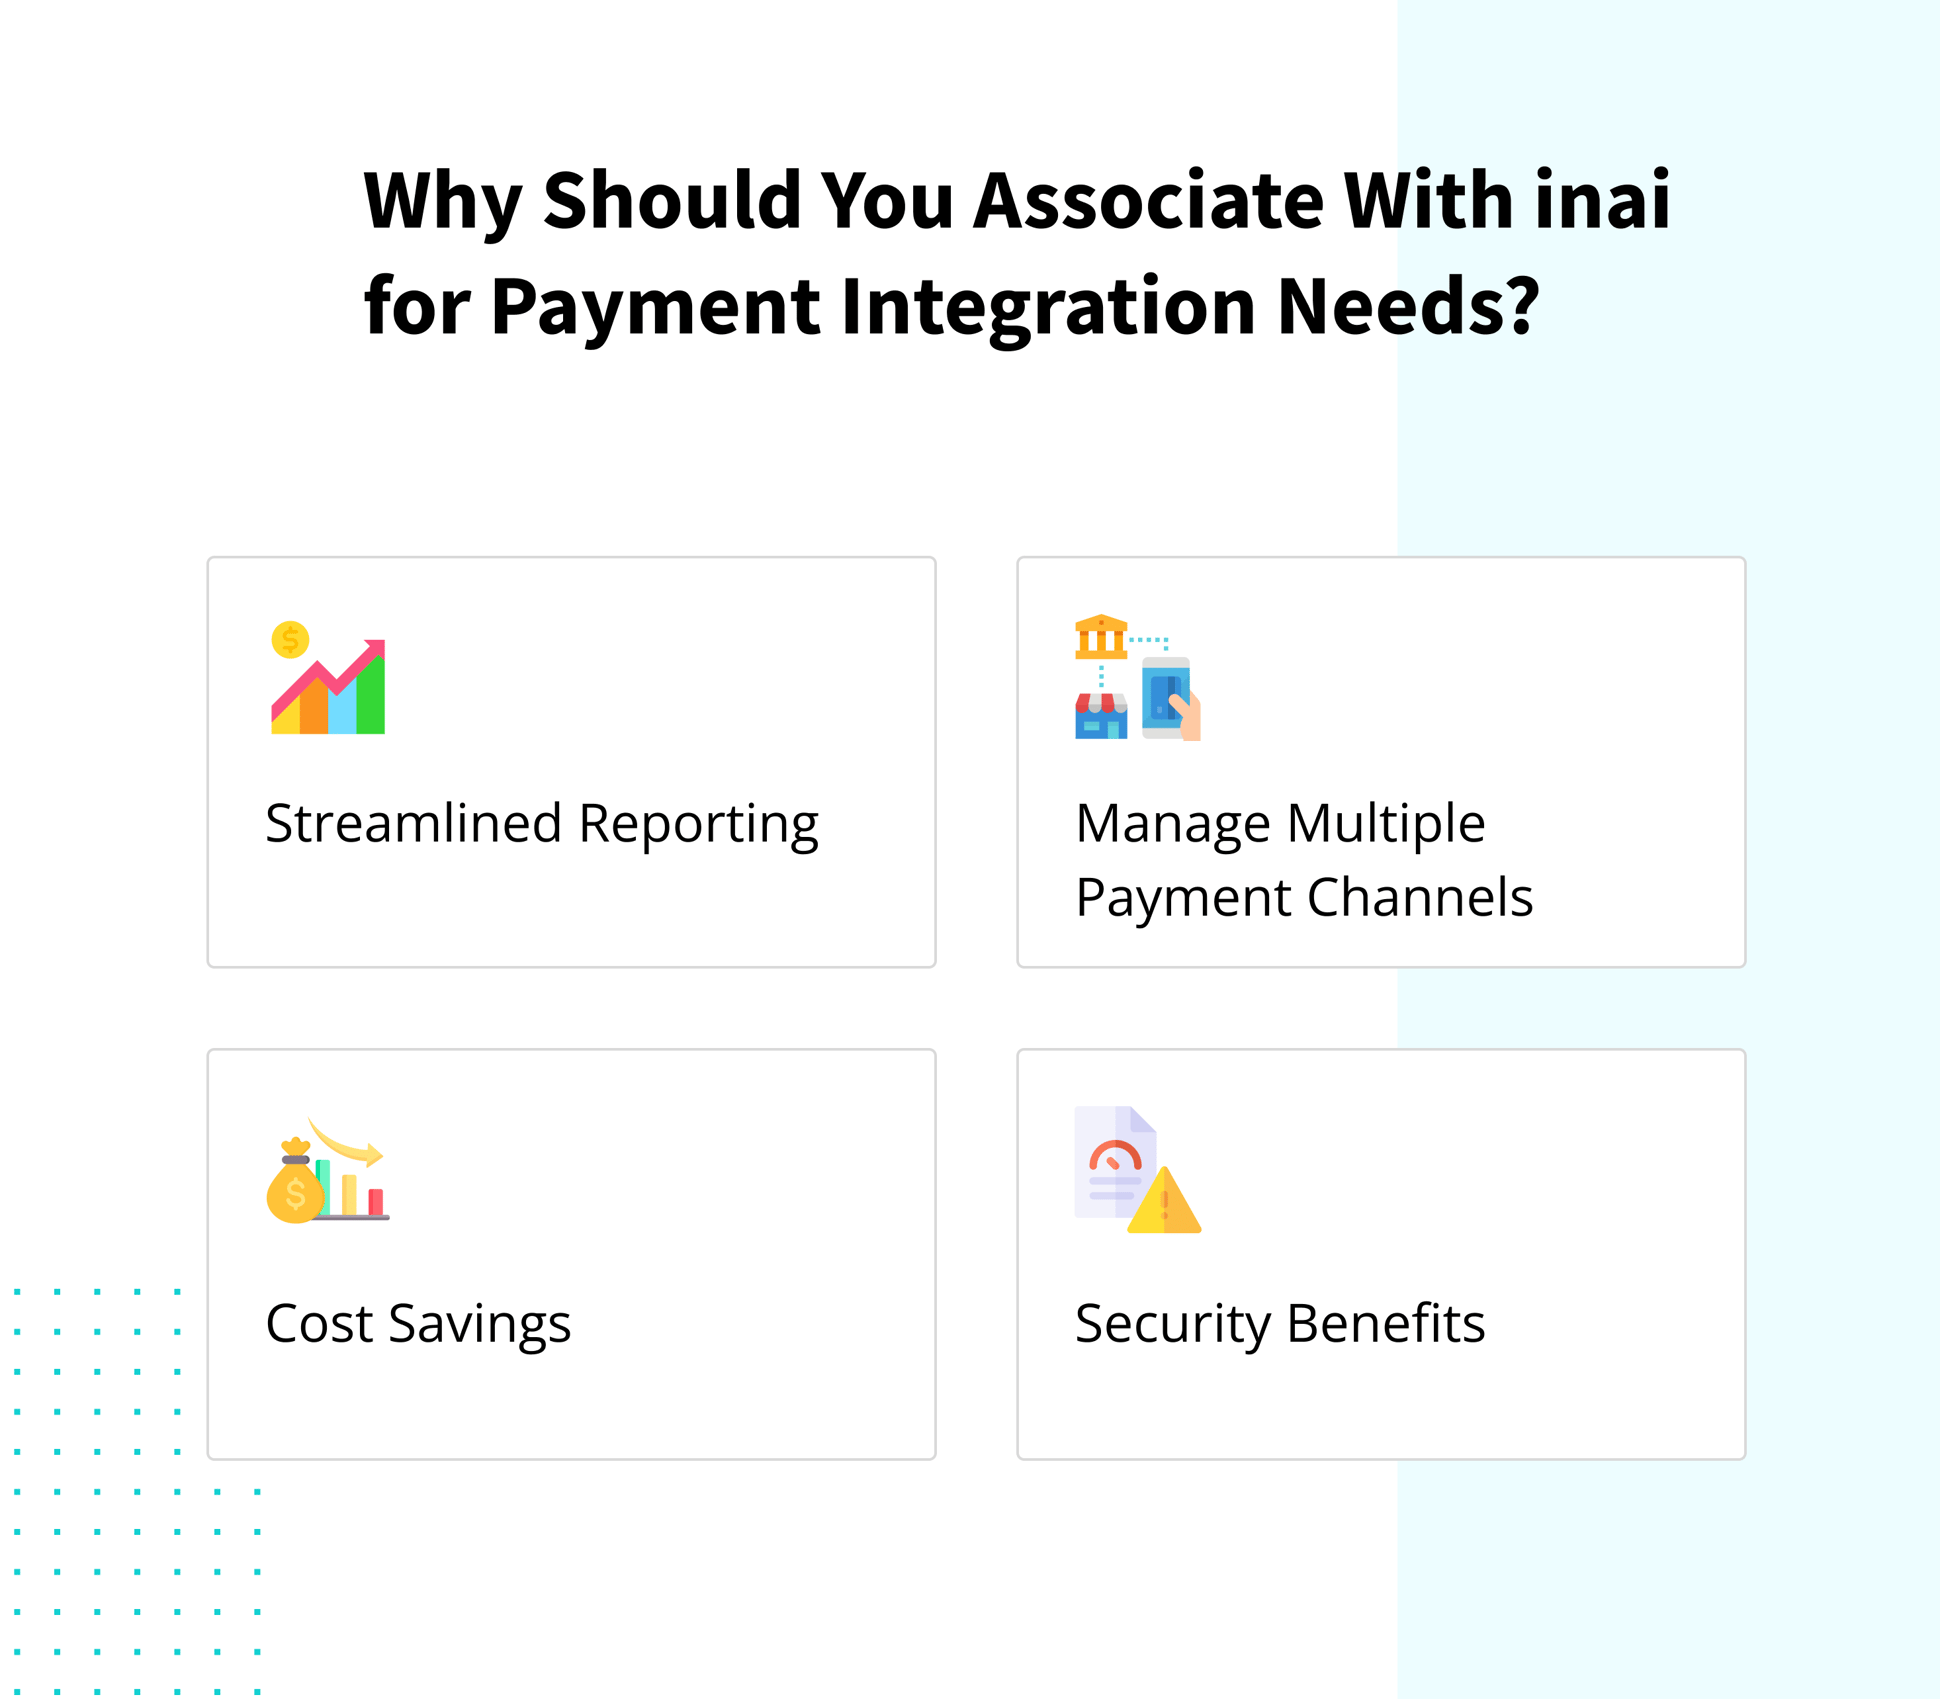  Why Should You Associate With inai for Payment Integration Needs?